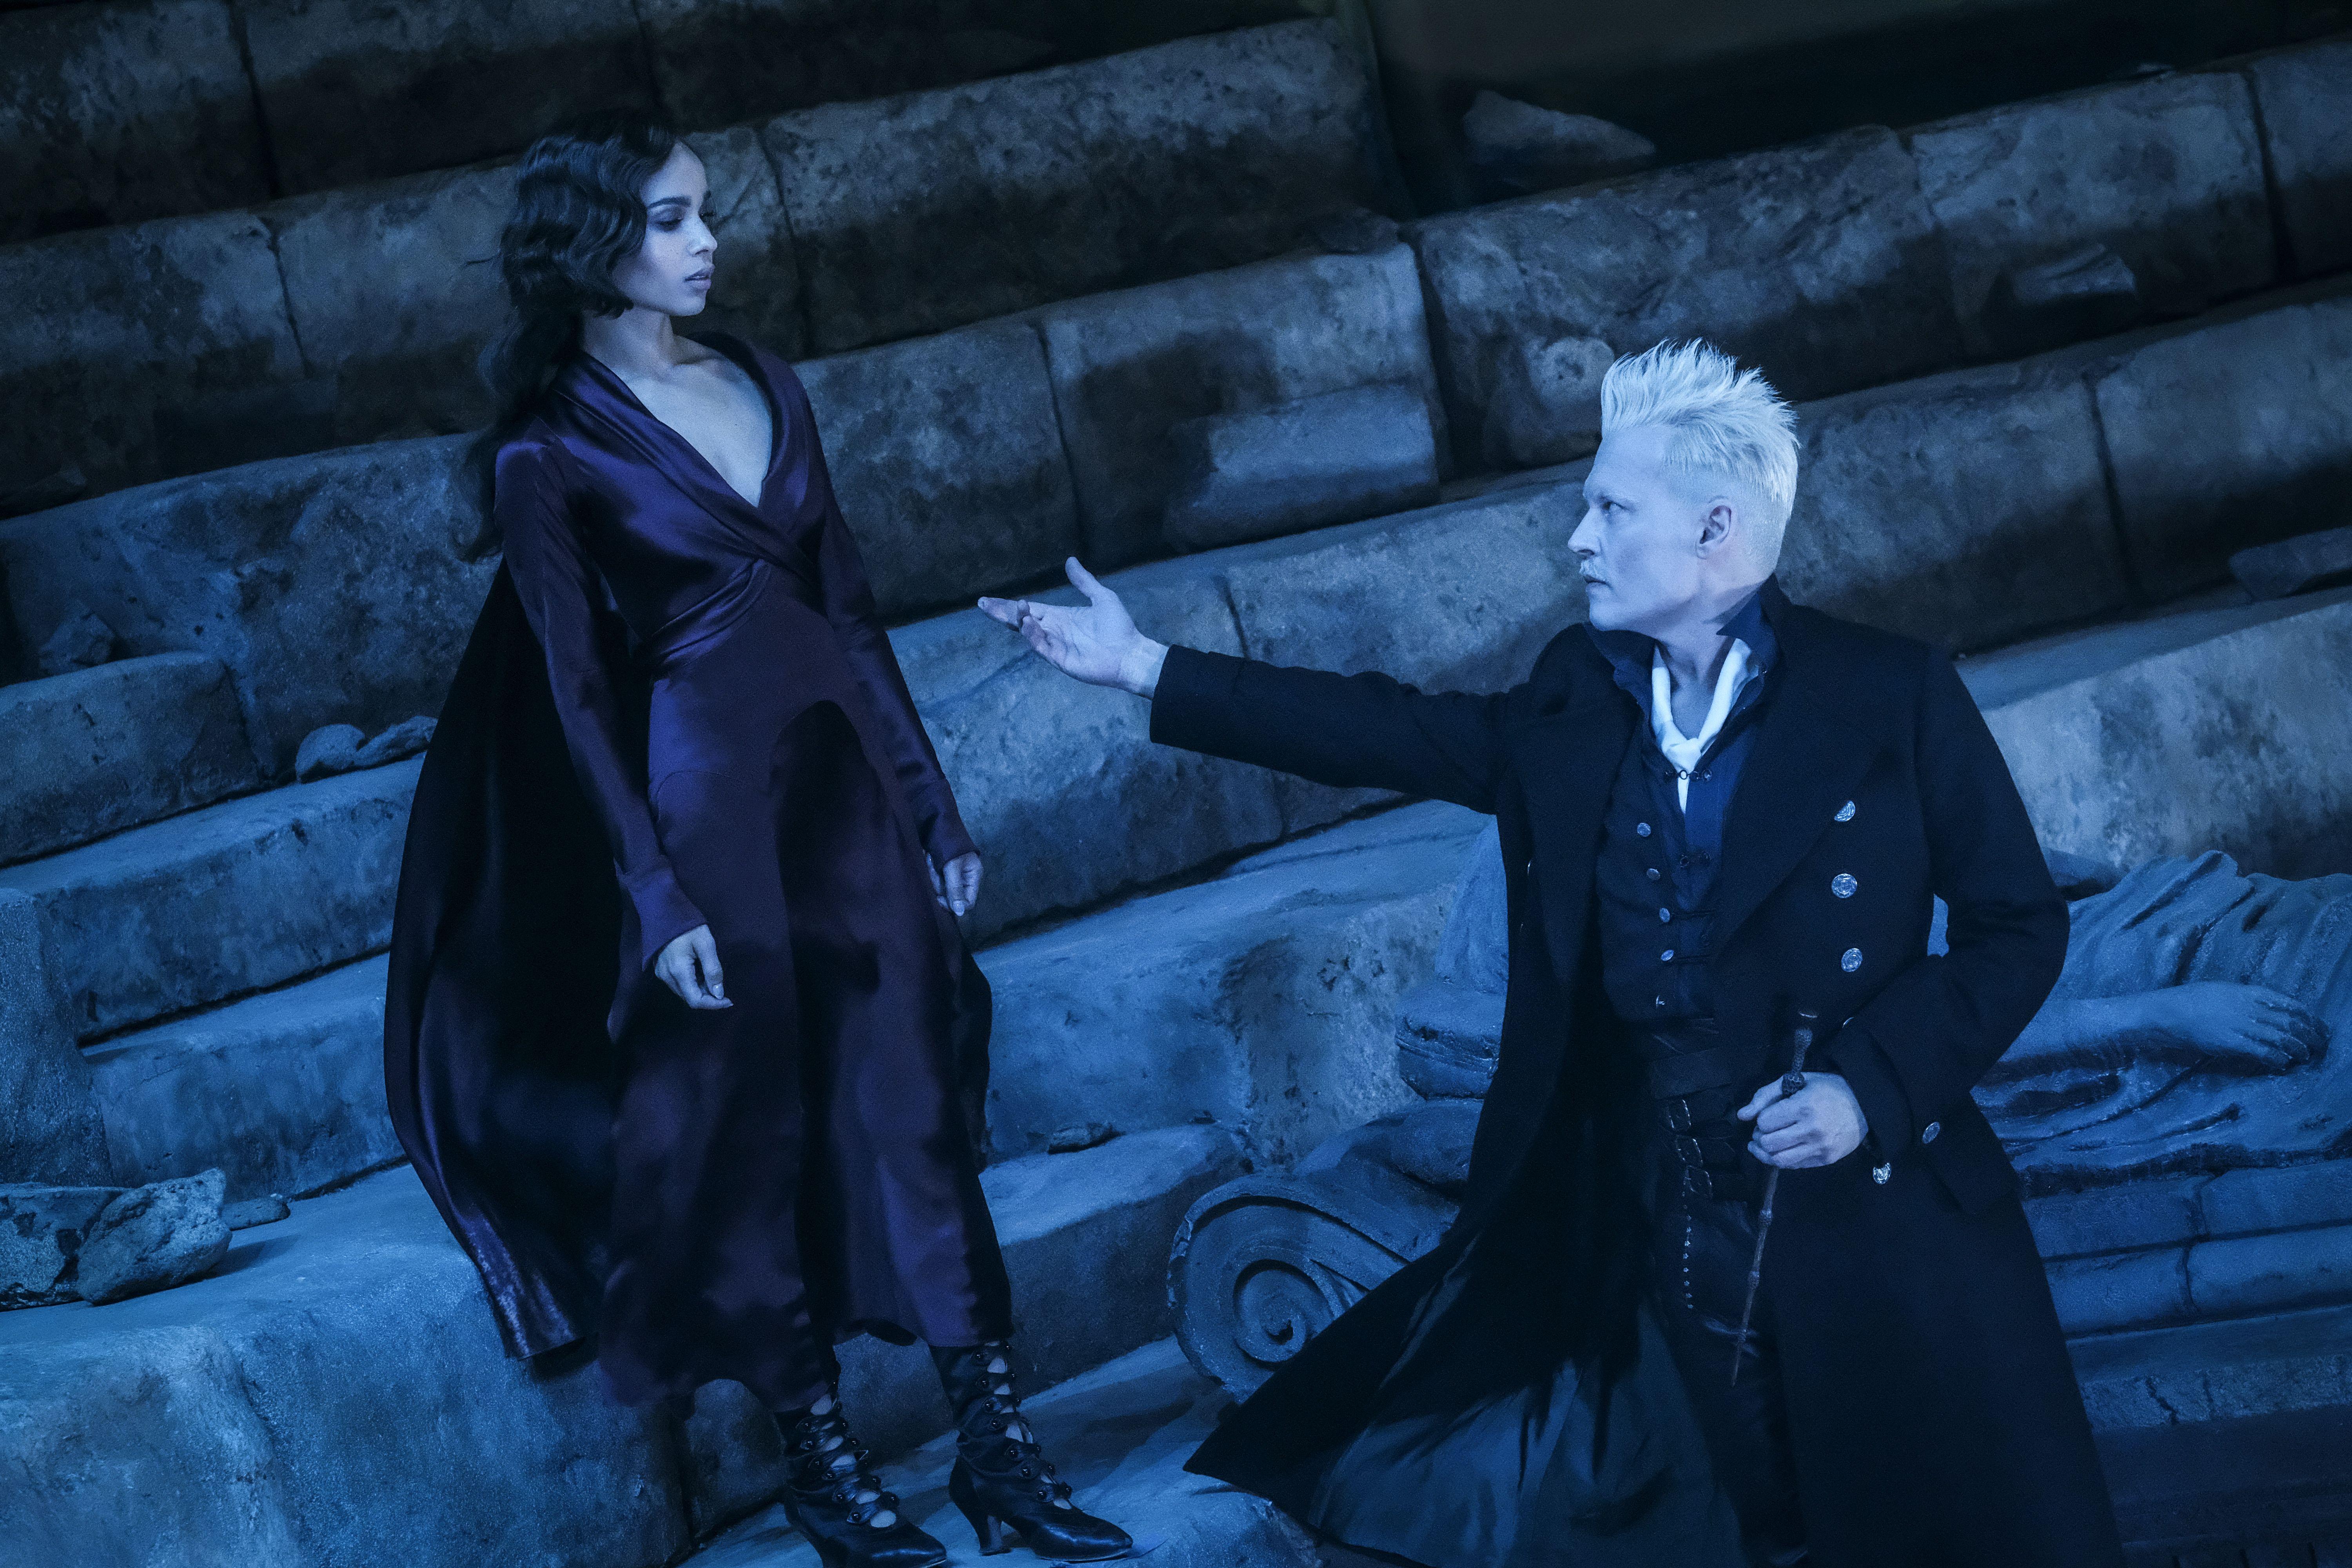 Heroes, Villains, and Beasts Galore in New Crimes of Grindelwald